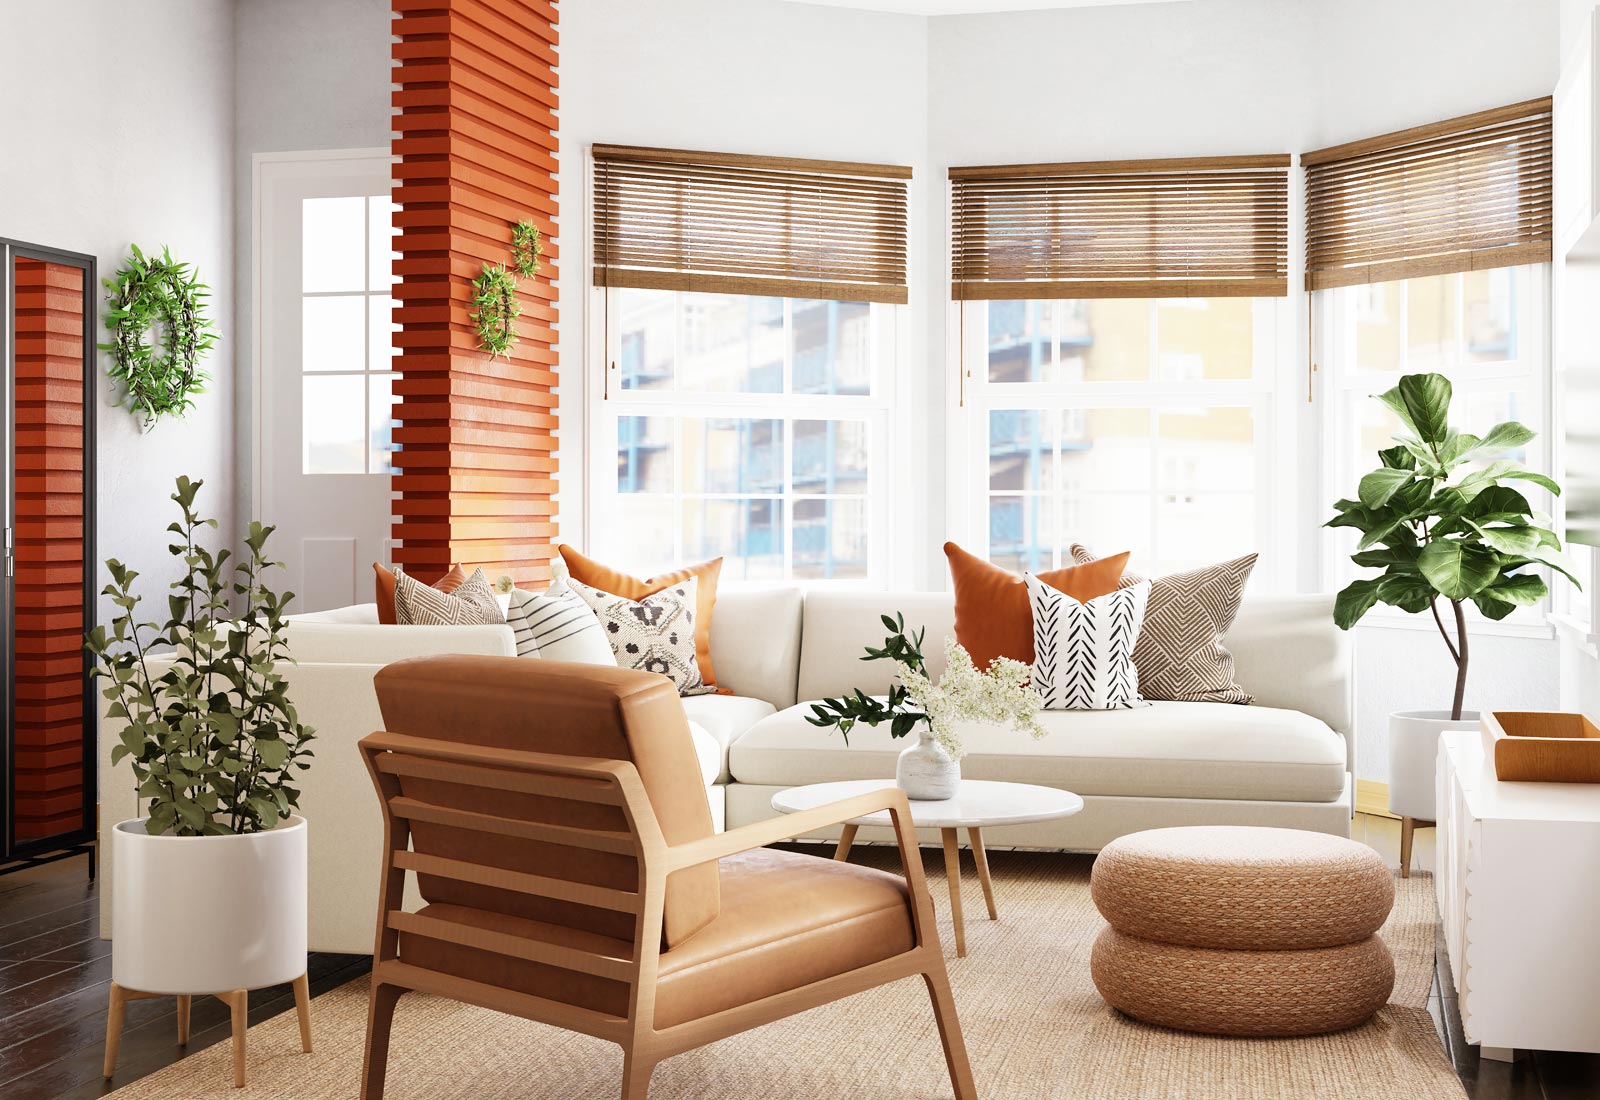 living room with blinds